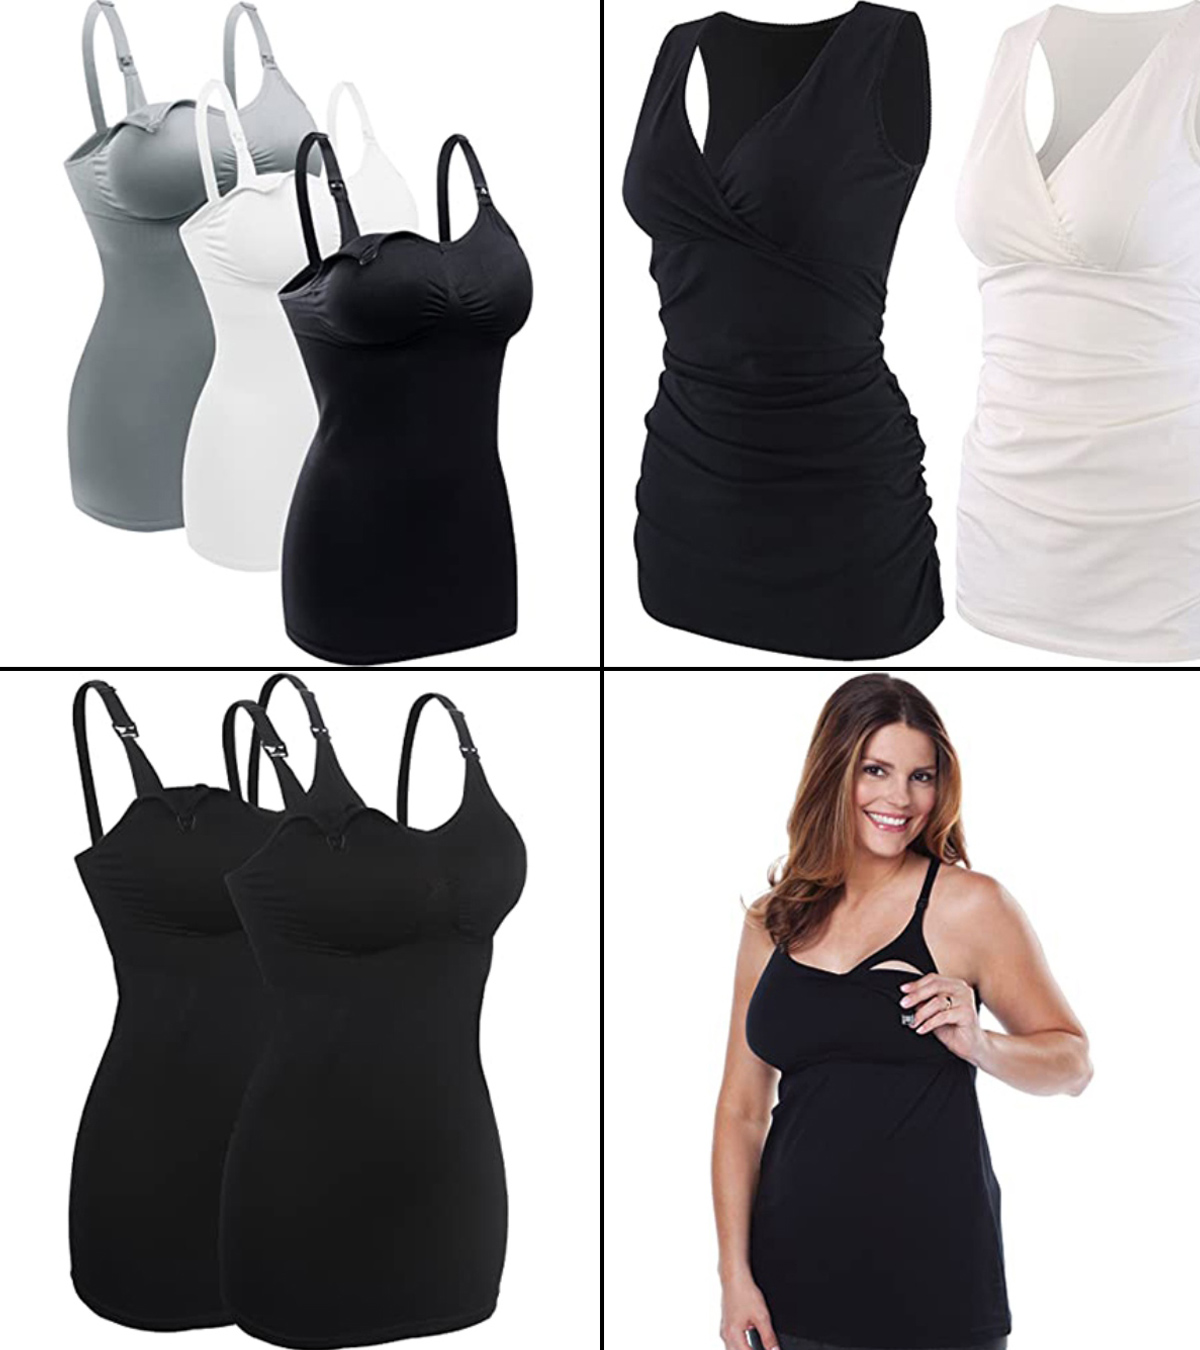 Maternity Loving Moments by Leading Lady Nursing Cami with Shelf